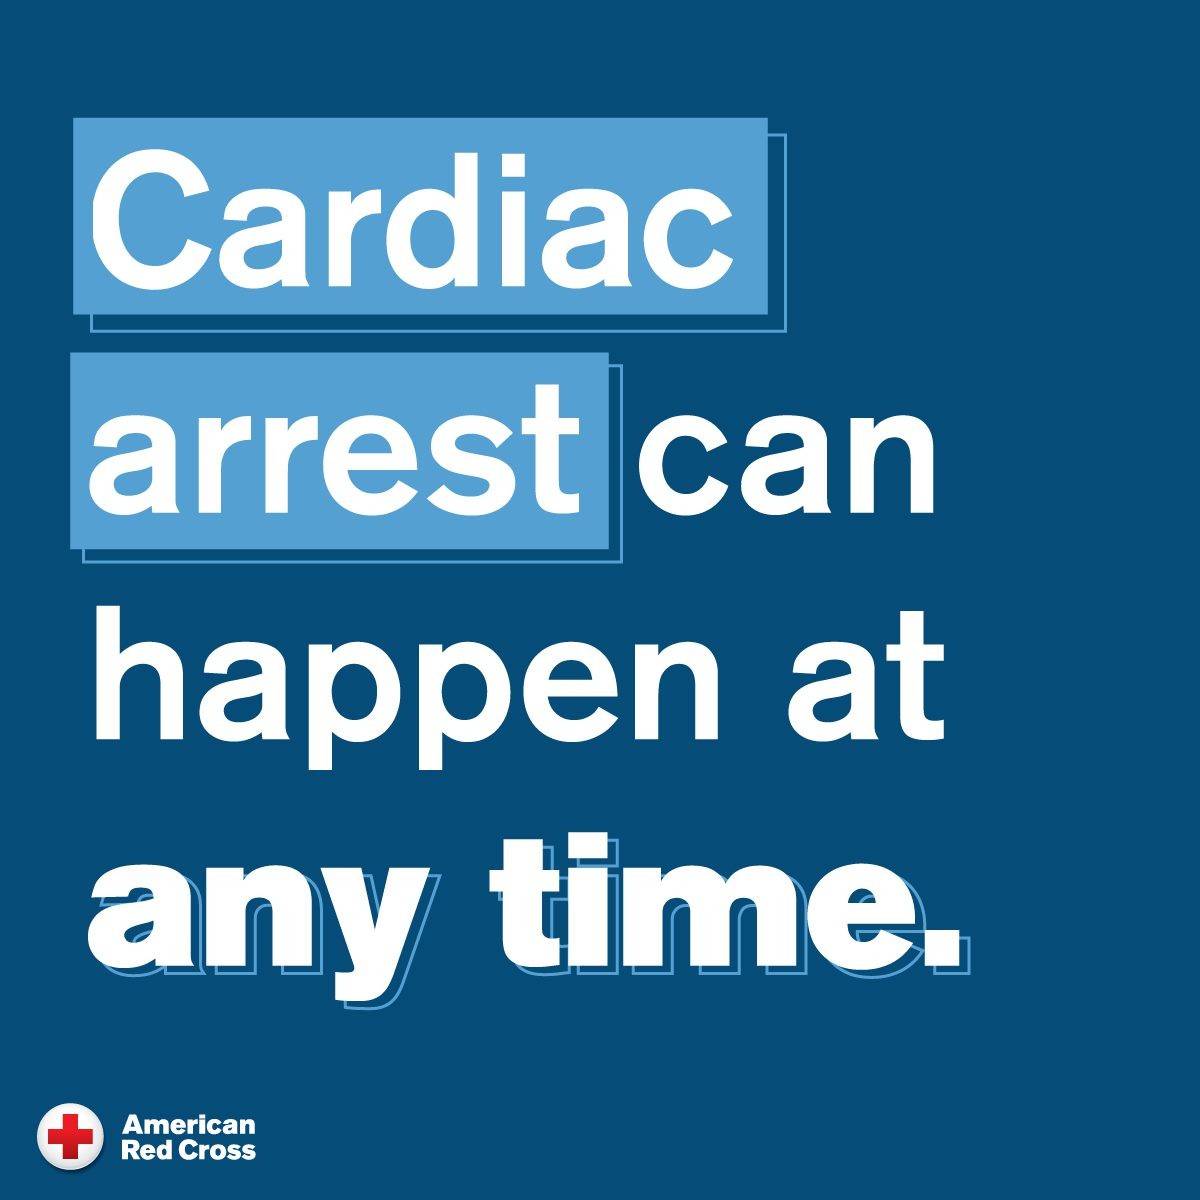 Cardiac arrest can happen at any time